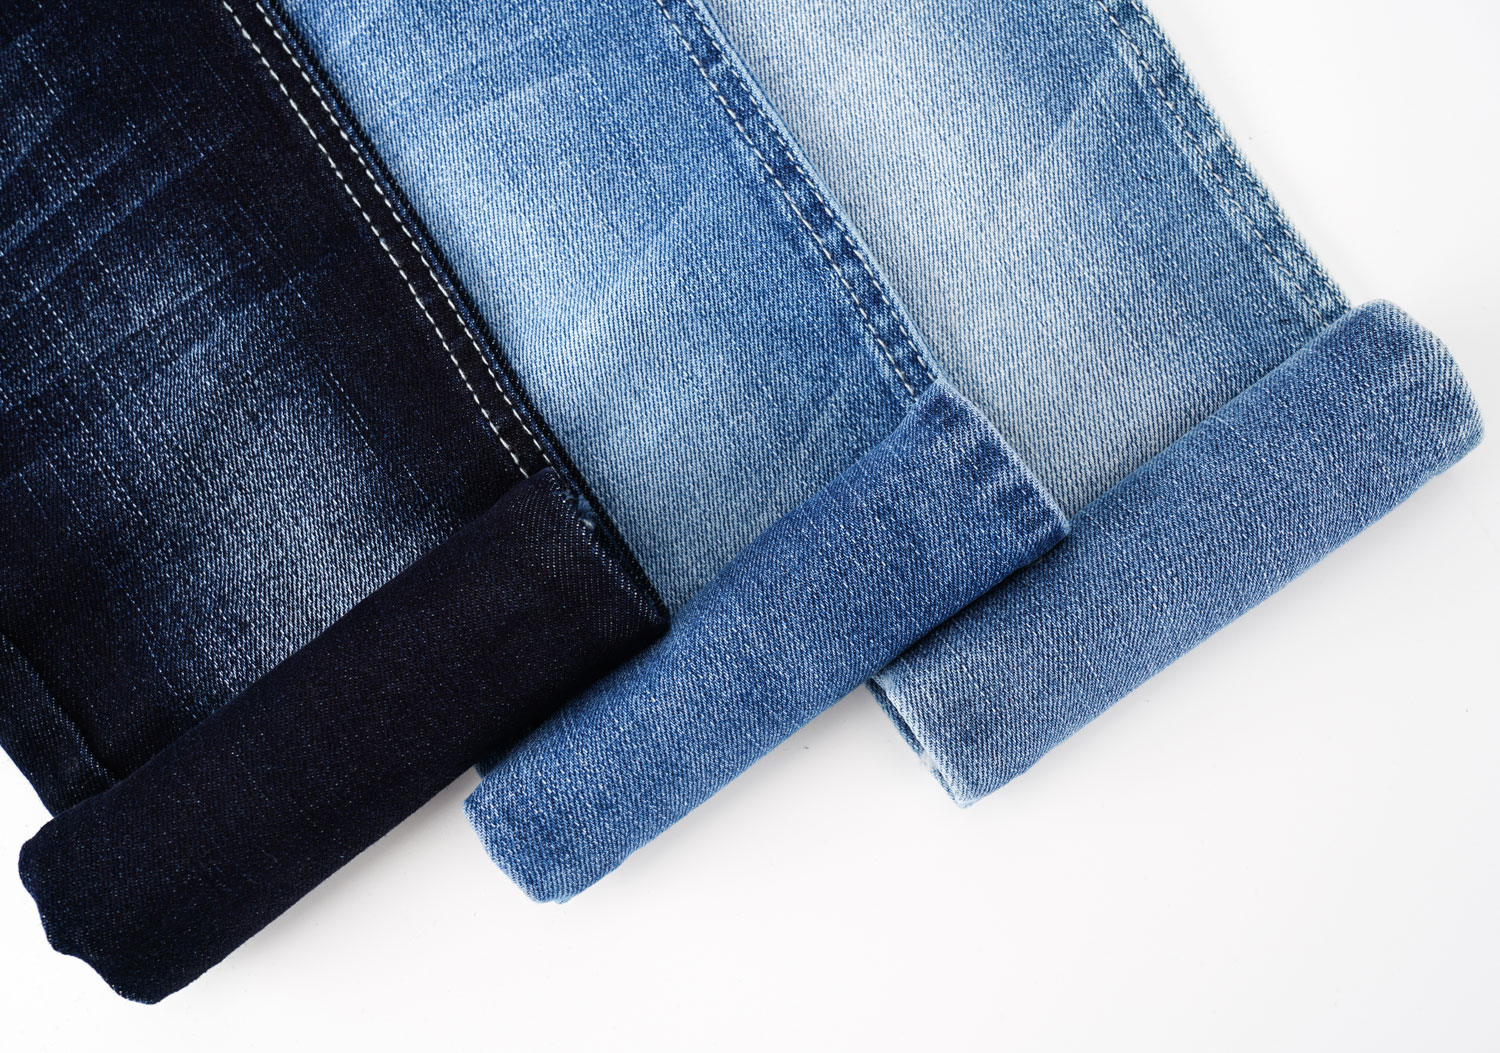 10 Useful Tips on Denim Material Fabric 1